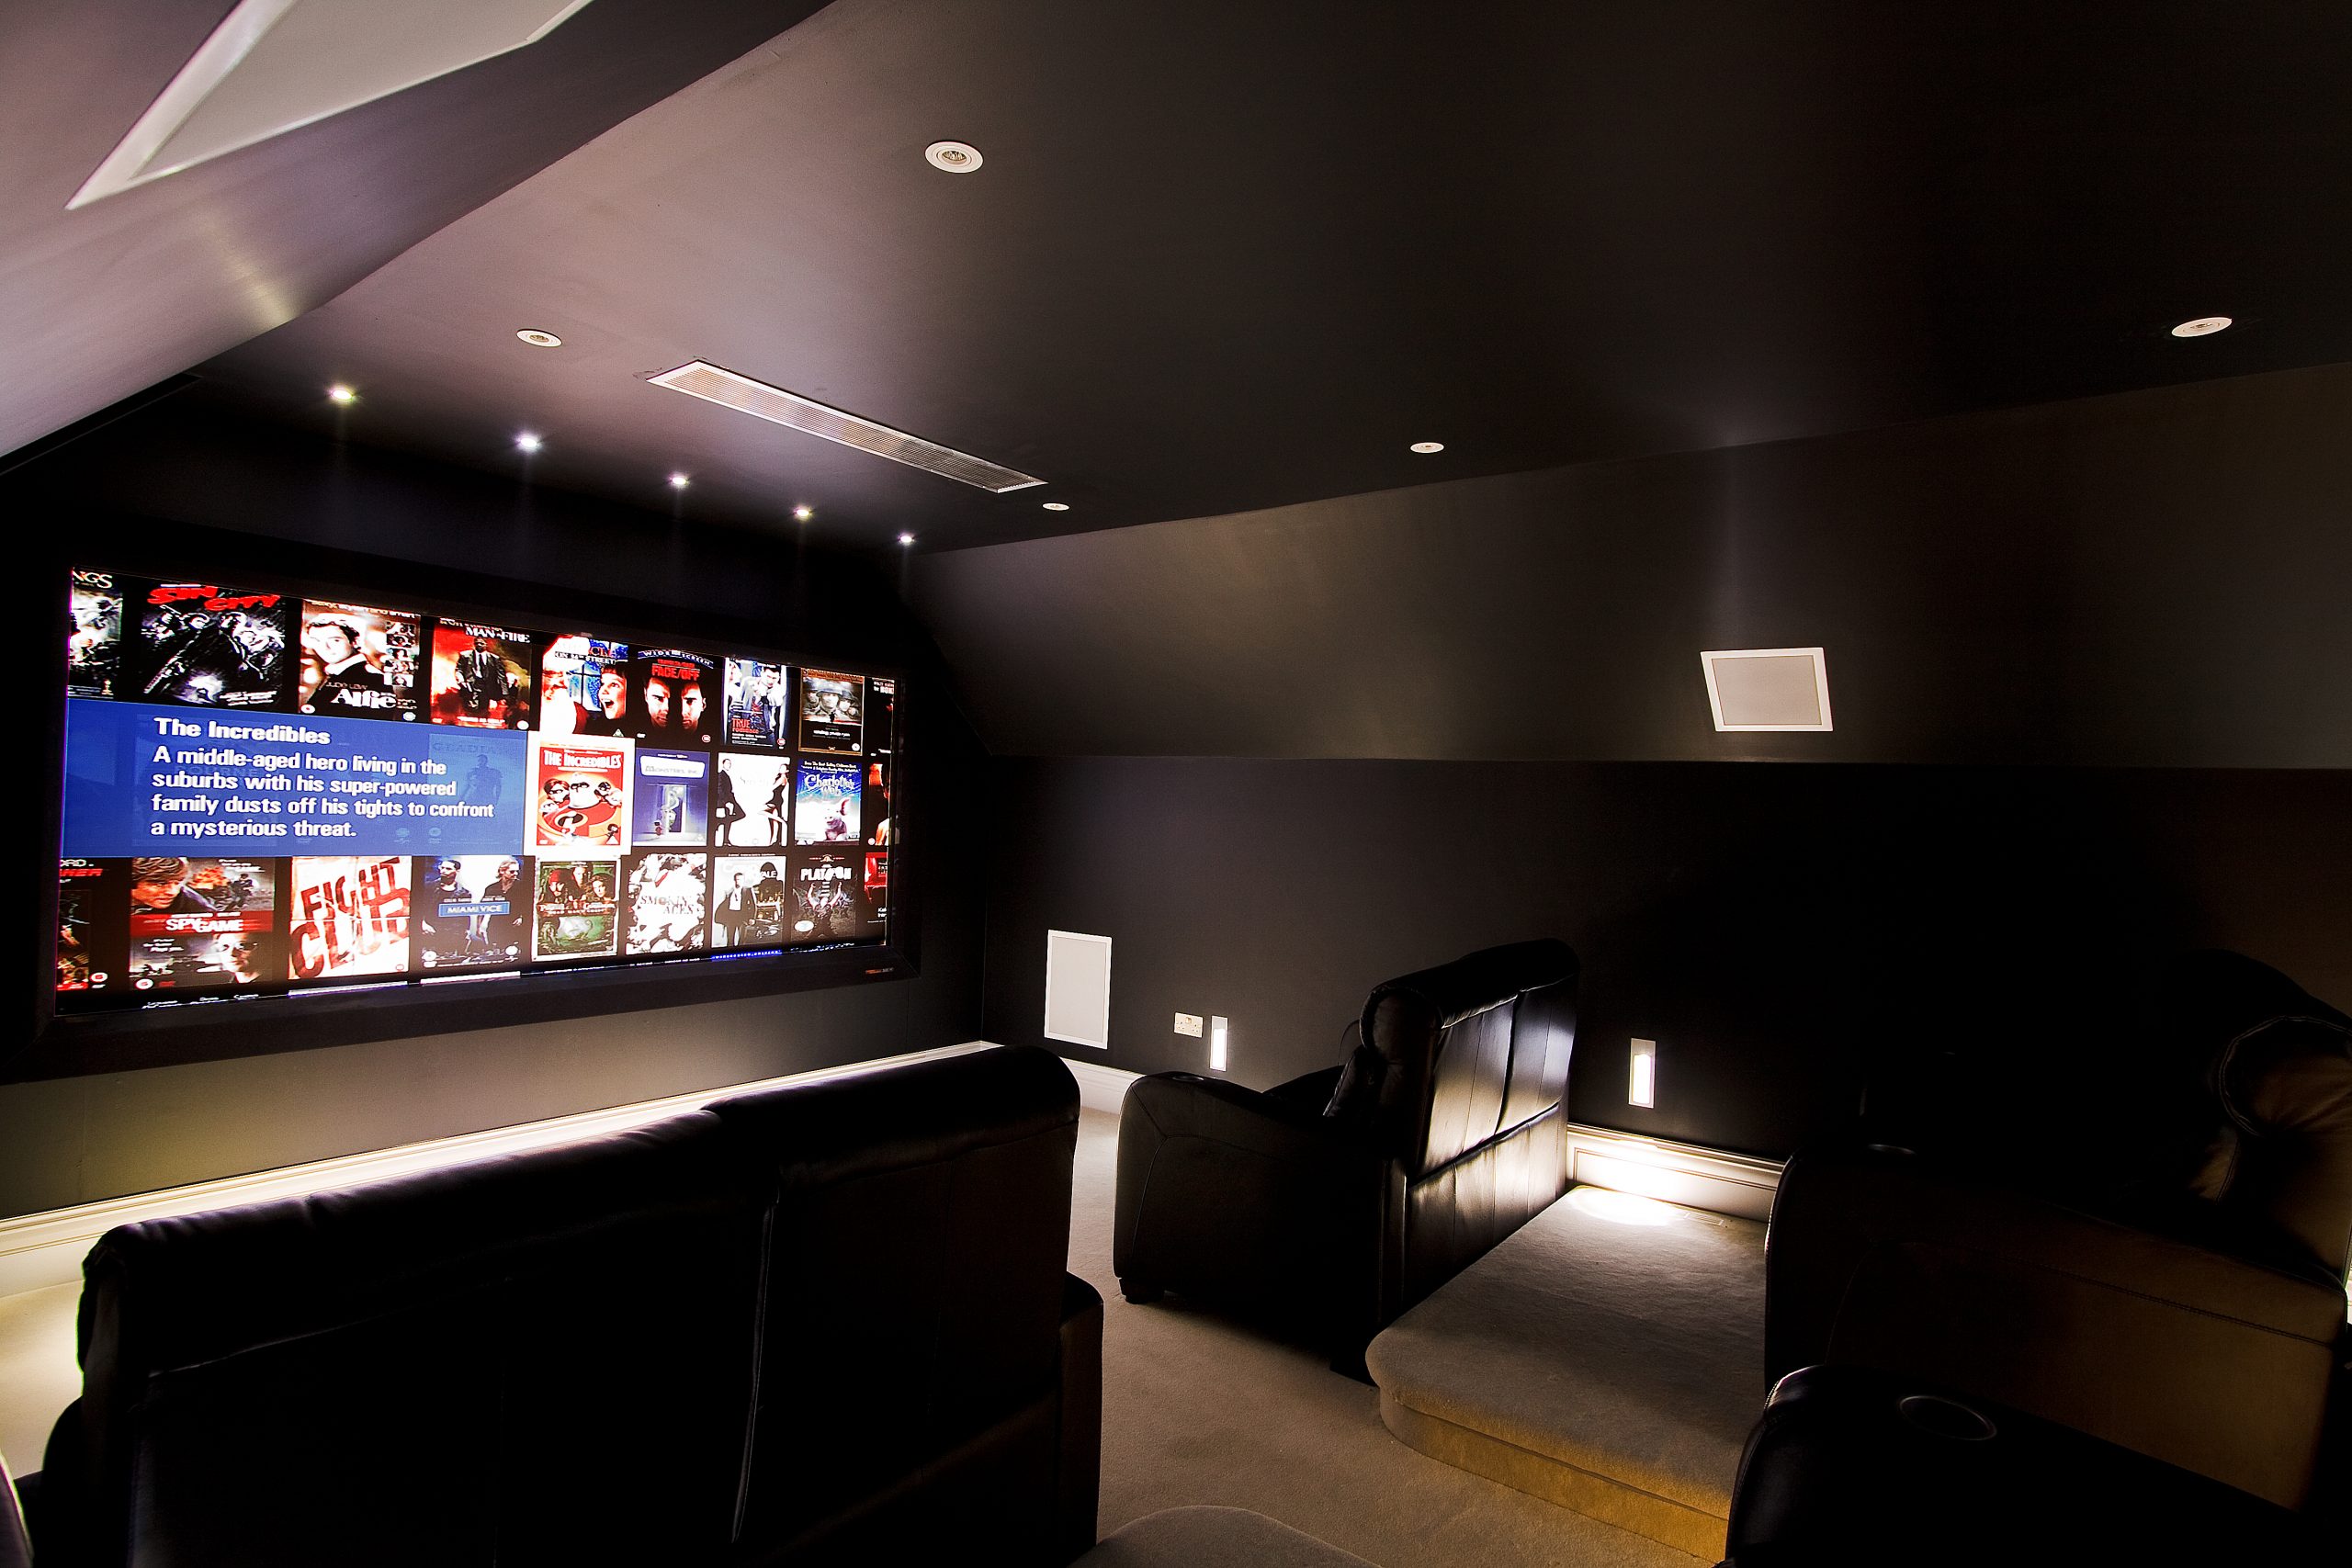 Shows home cinema from side left, with comfortable cinema seating and large acoustically transparent movie screen.